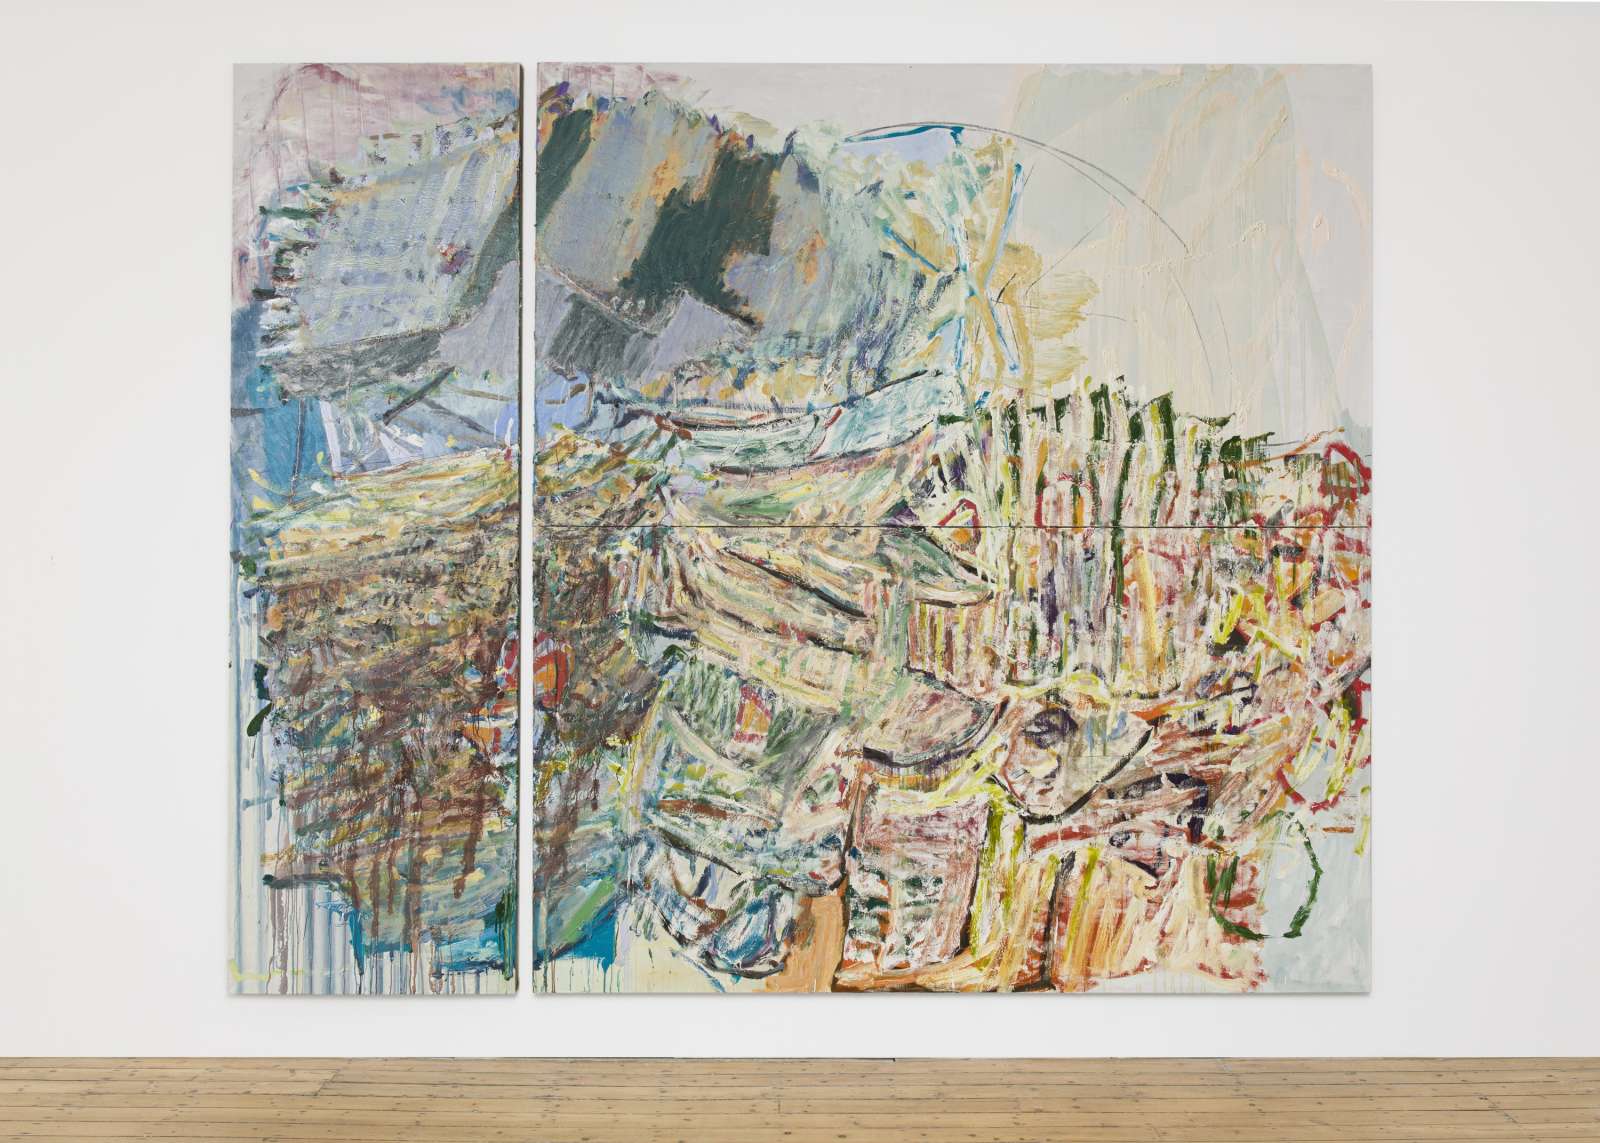 Pam Evelyn, Promised Land, 2022. Oil on linen, Triptych, 320 x 390cm